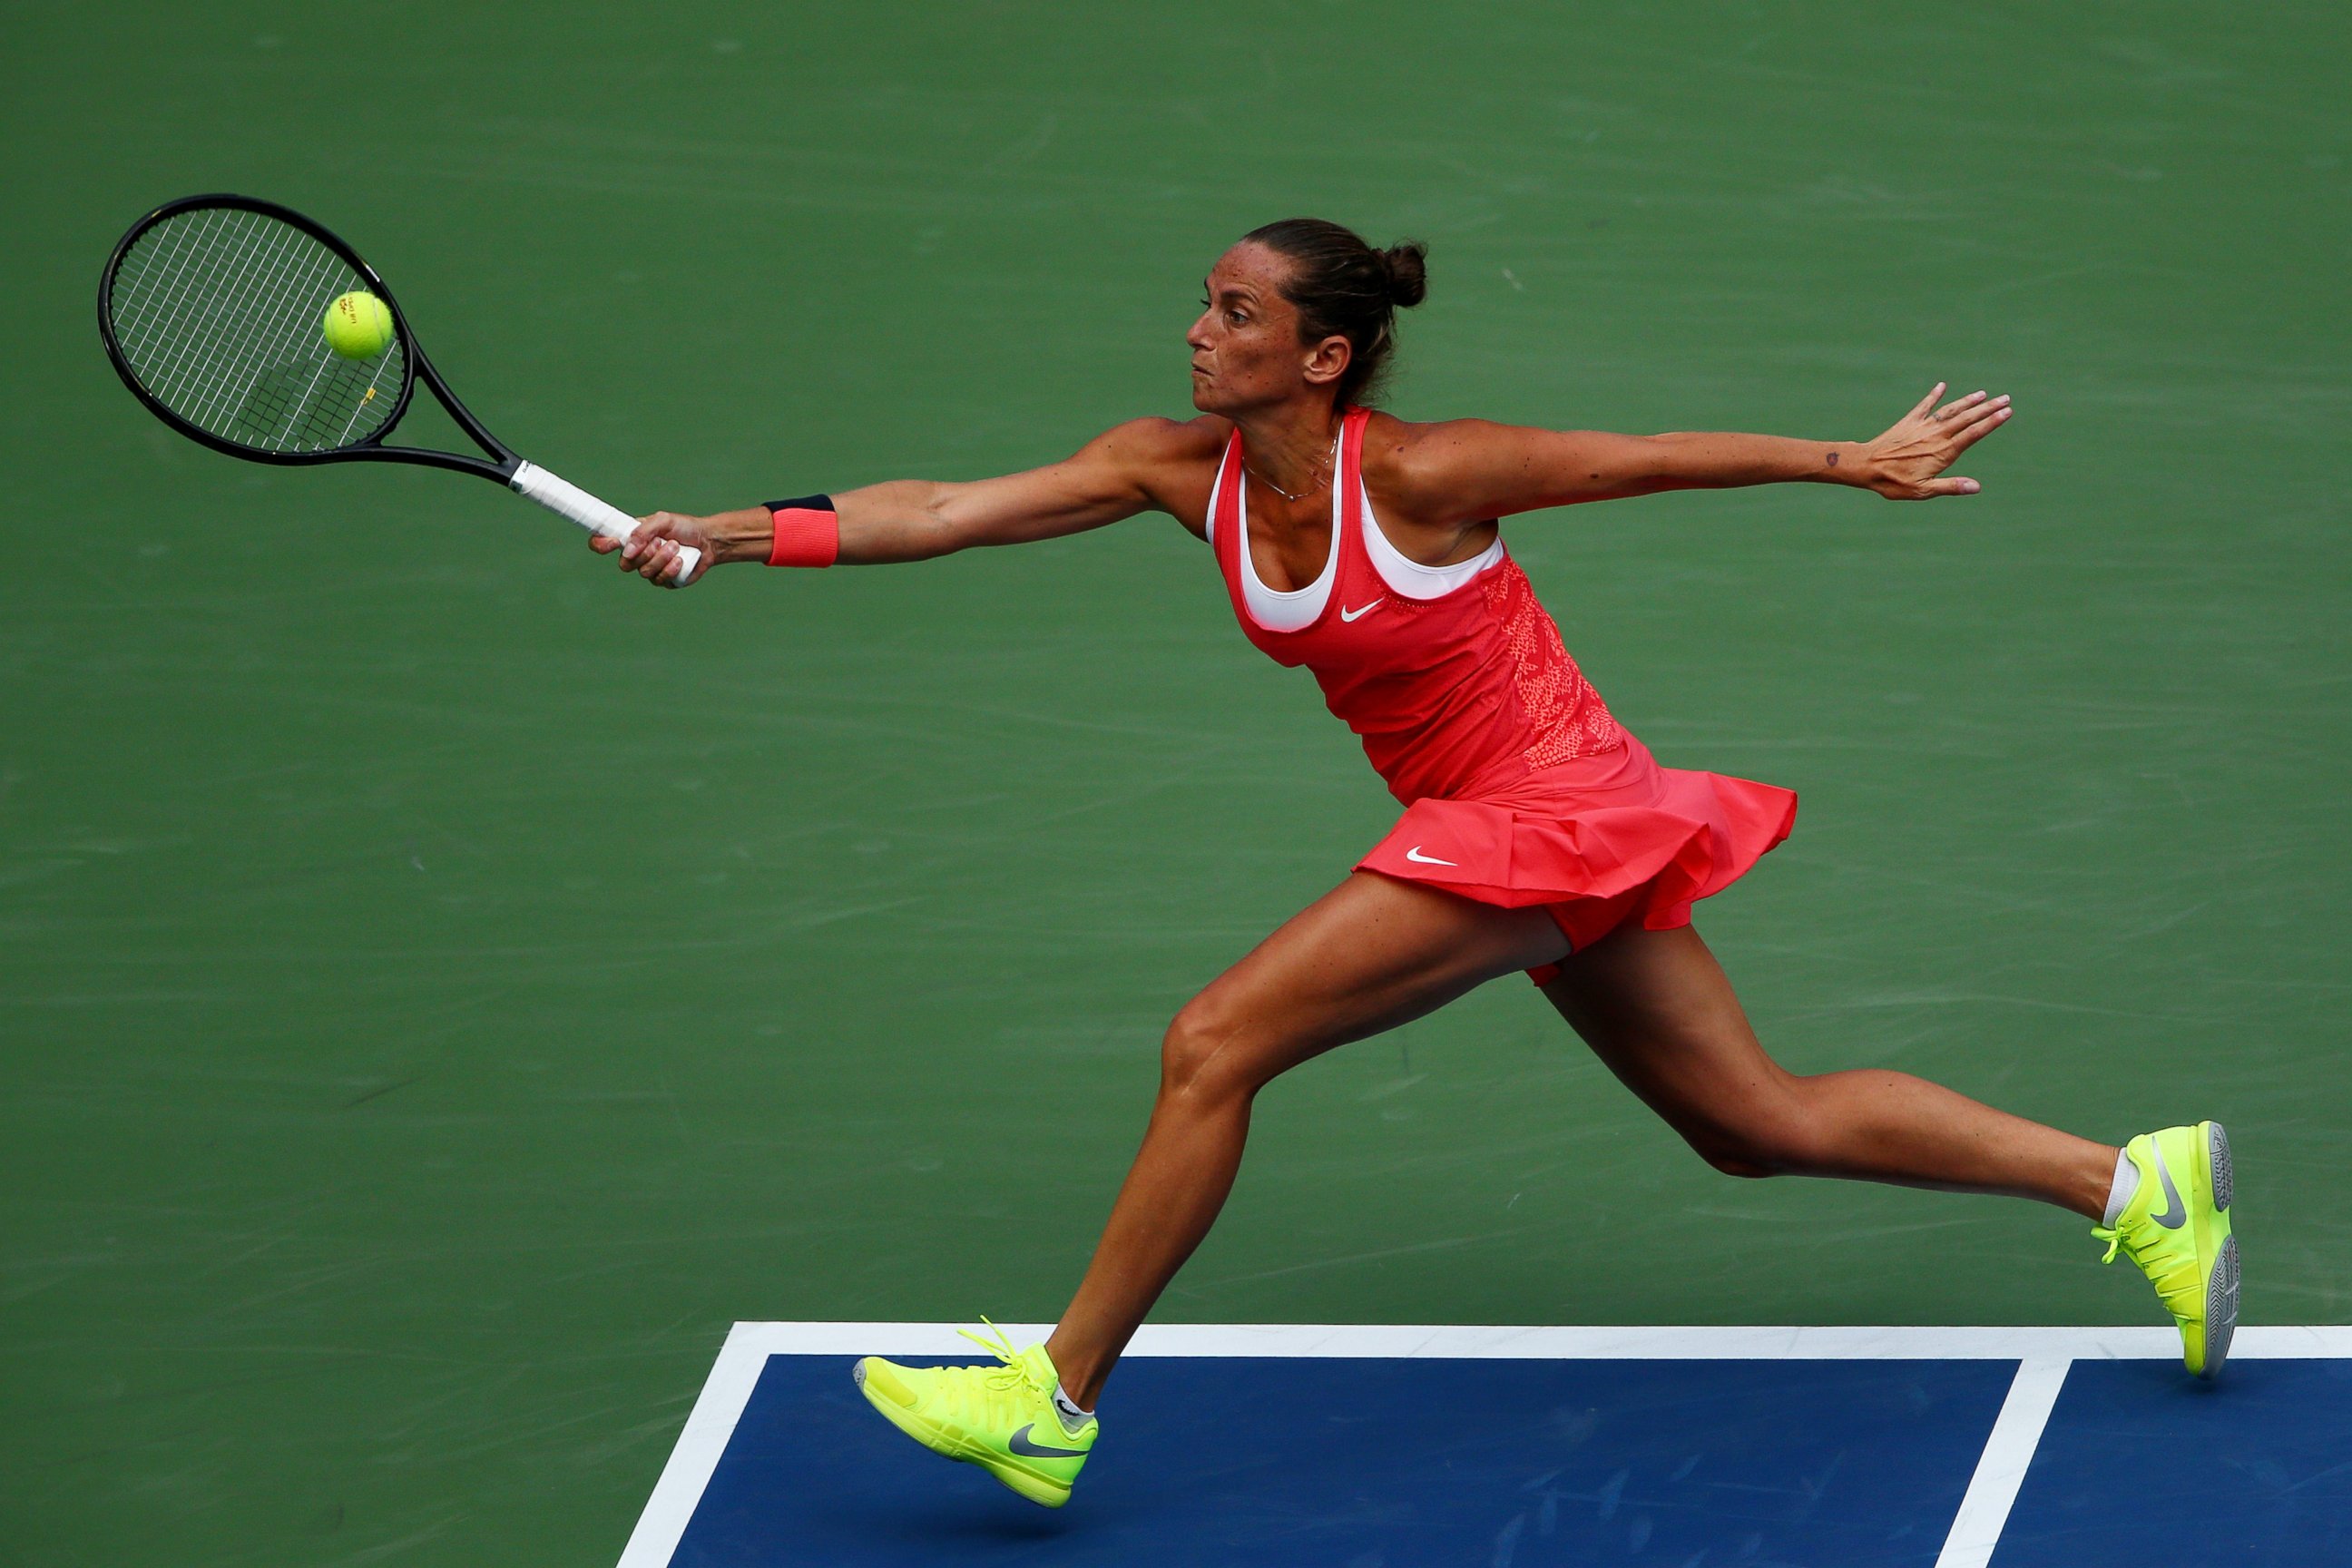 PHOTO: Roberta Vinci of Italy returns a shot to Serena Williams during the U.S. Open tournament, Sept. 11, 2015 in New York. 